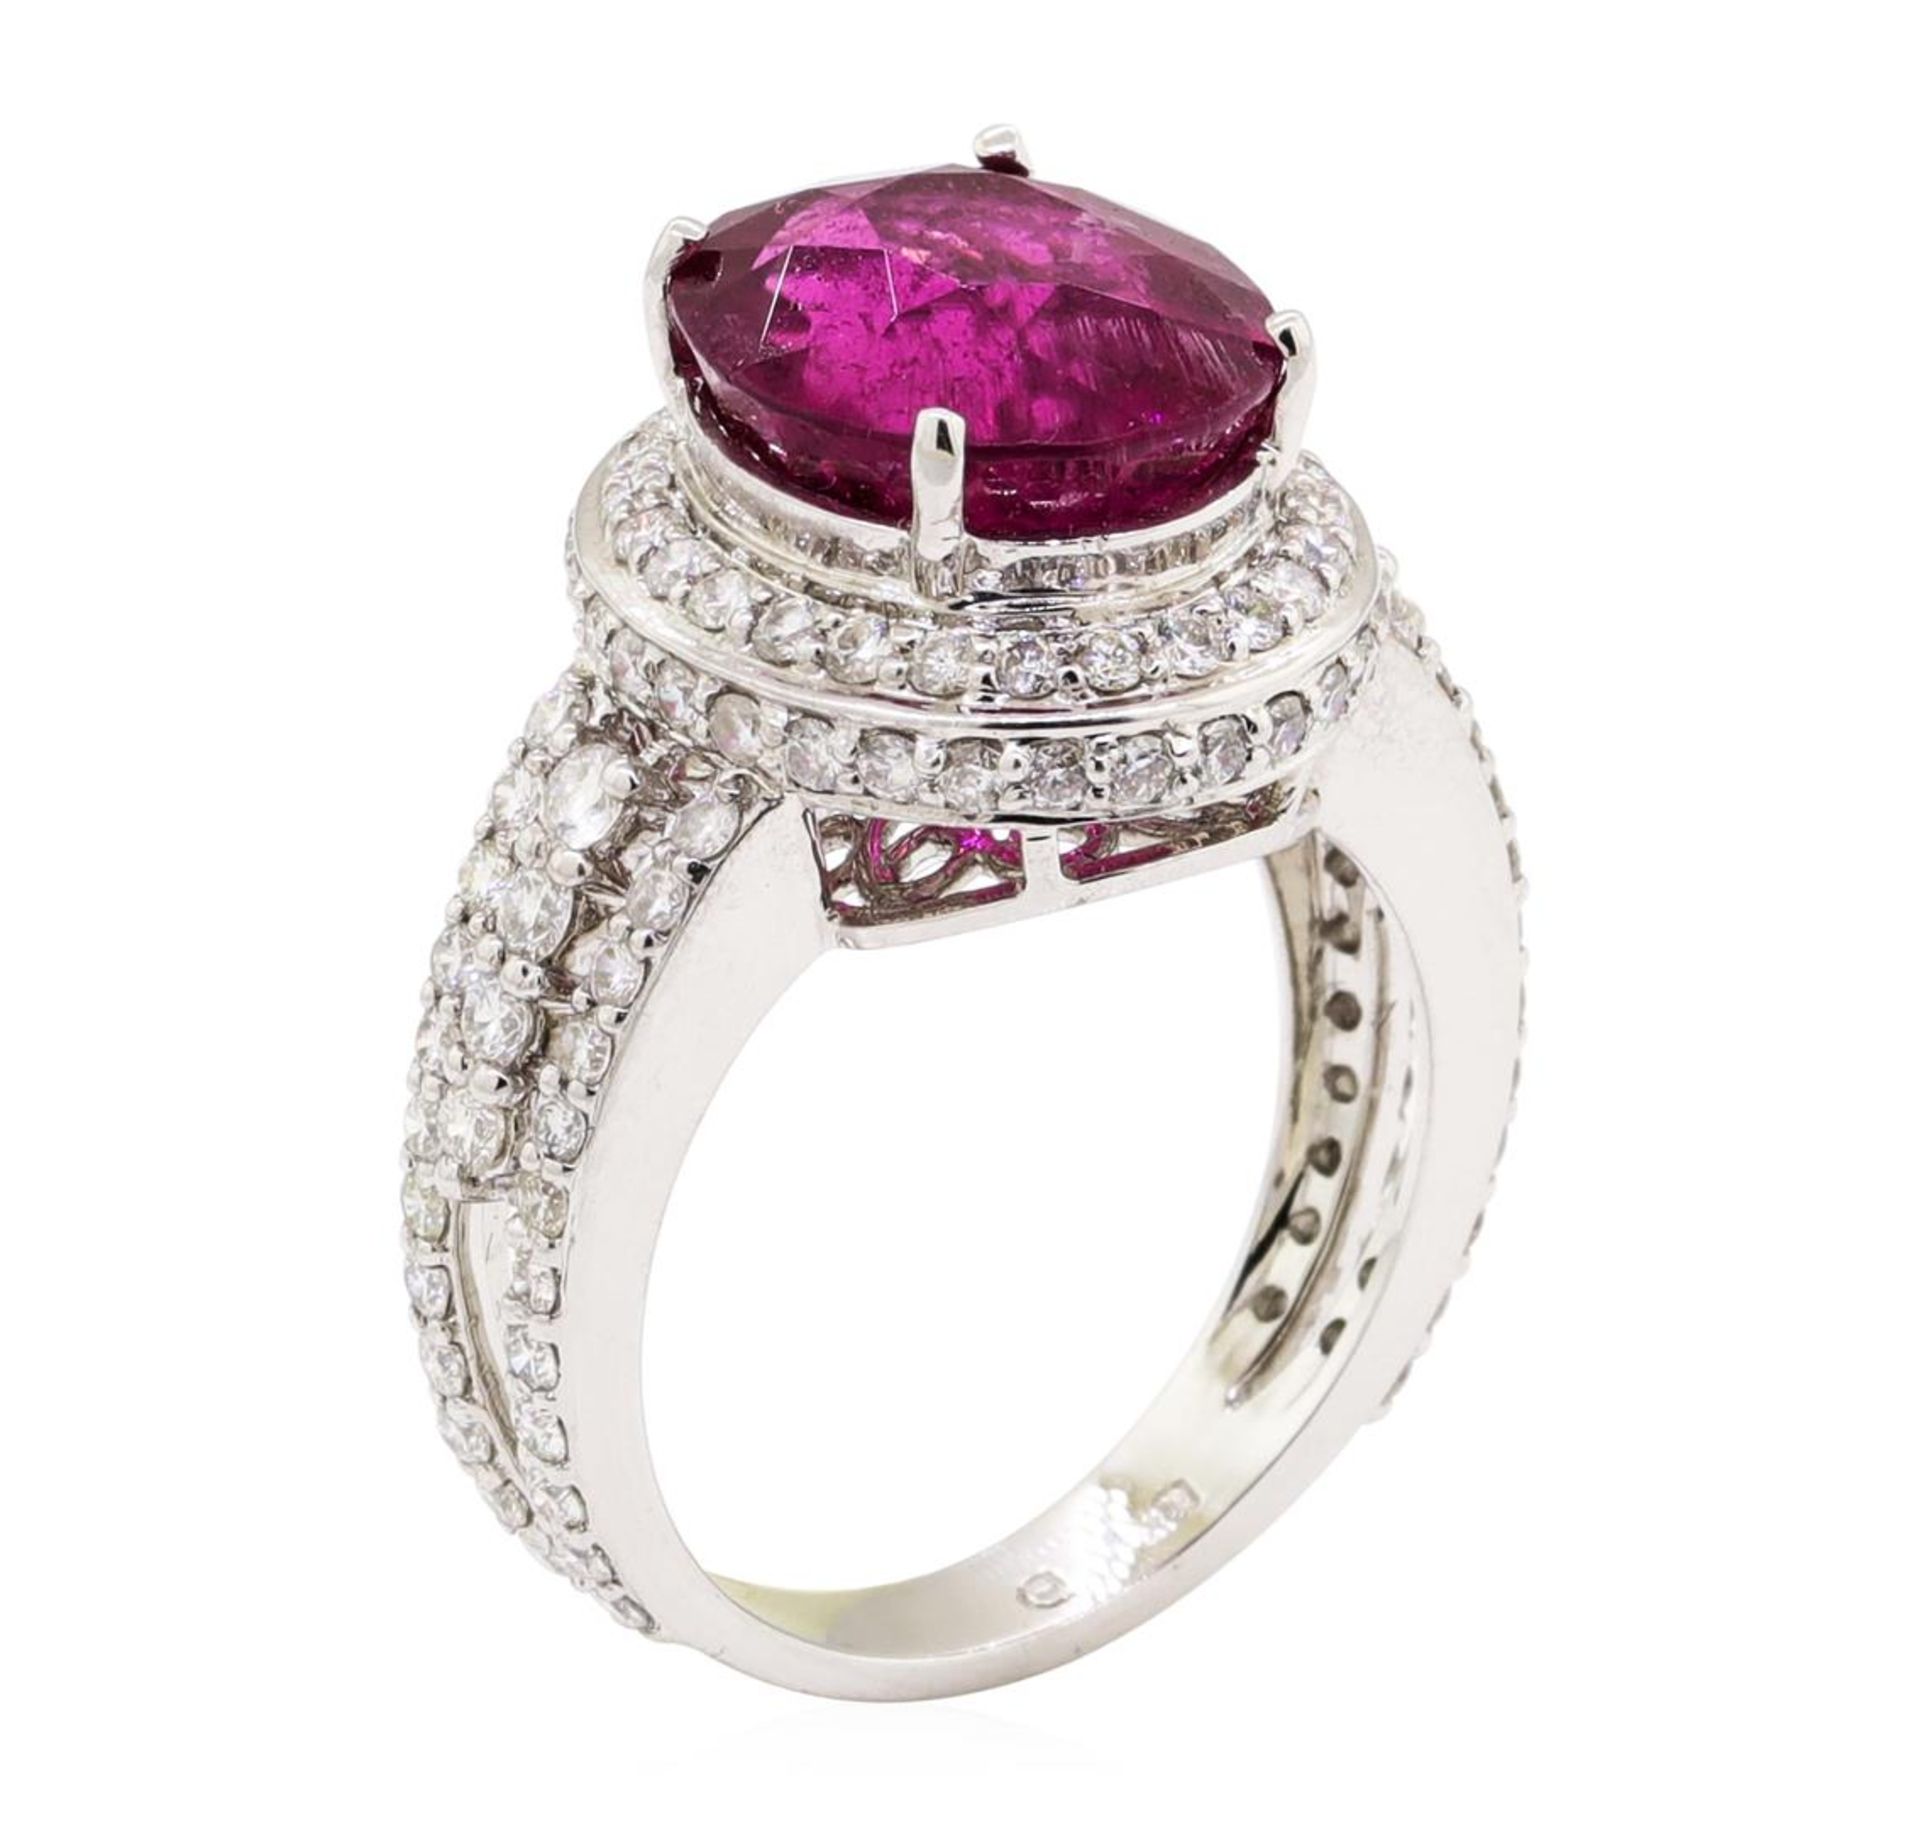 7.49 ctw Oval Mixed Rubellite And Round Brilliant Cut Diamond Ring - 18KT White - Image 4 of 5